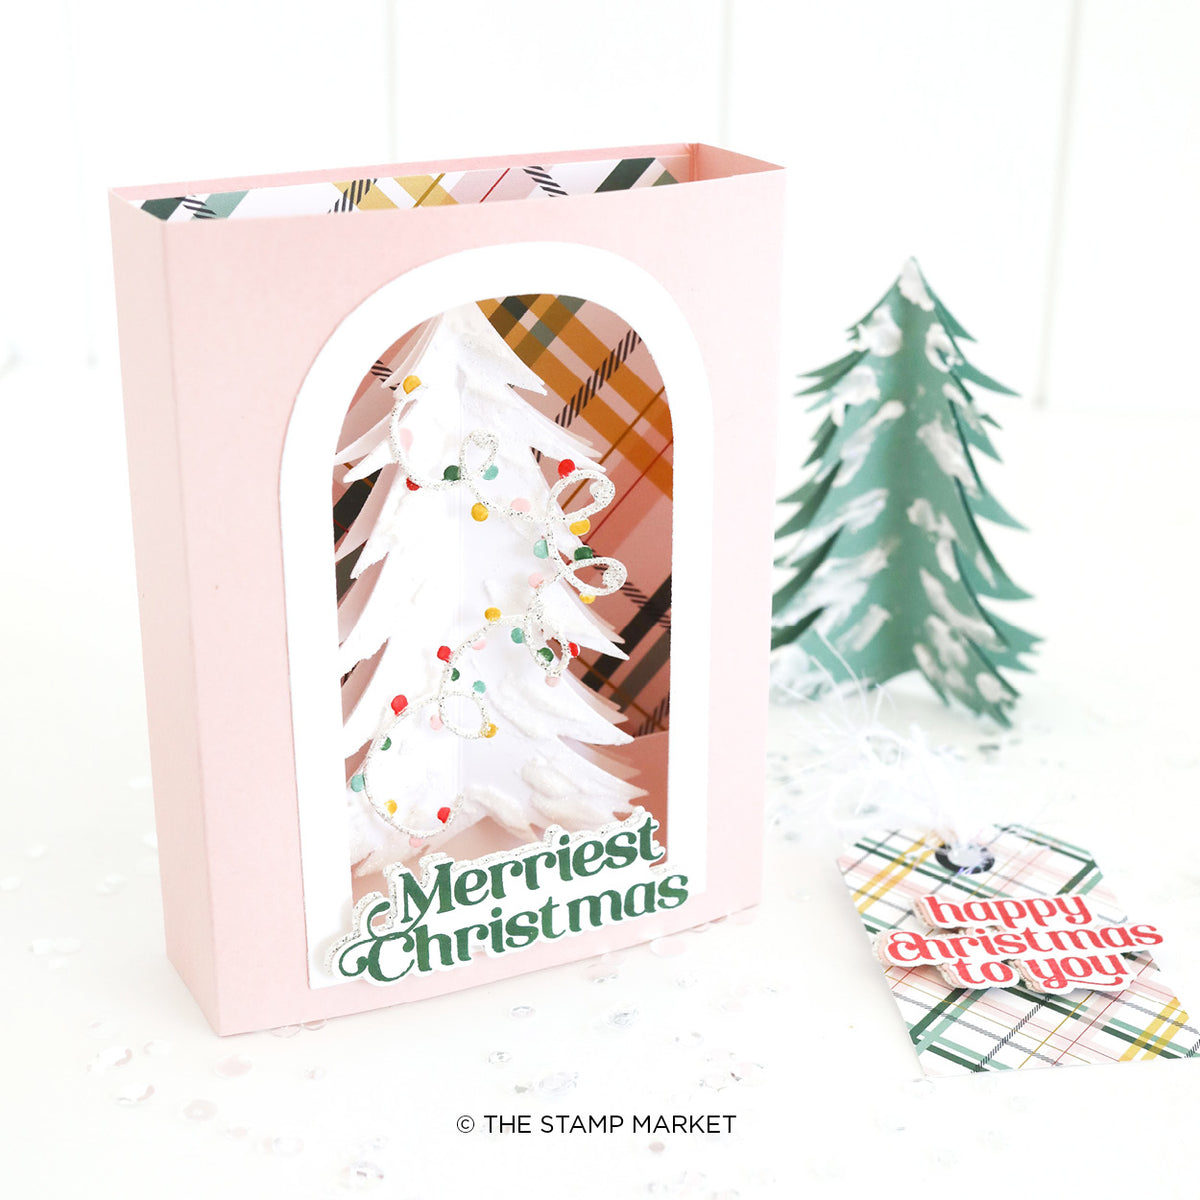 FEELS LIKE CHRISTMAS STAMP – The Stamp Market